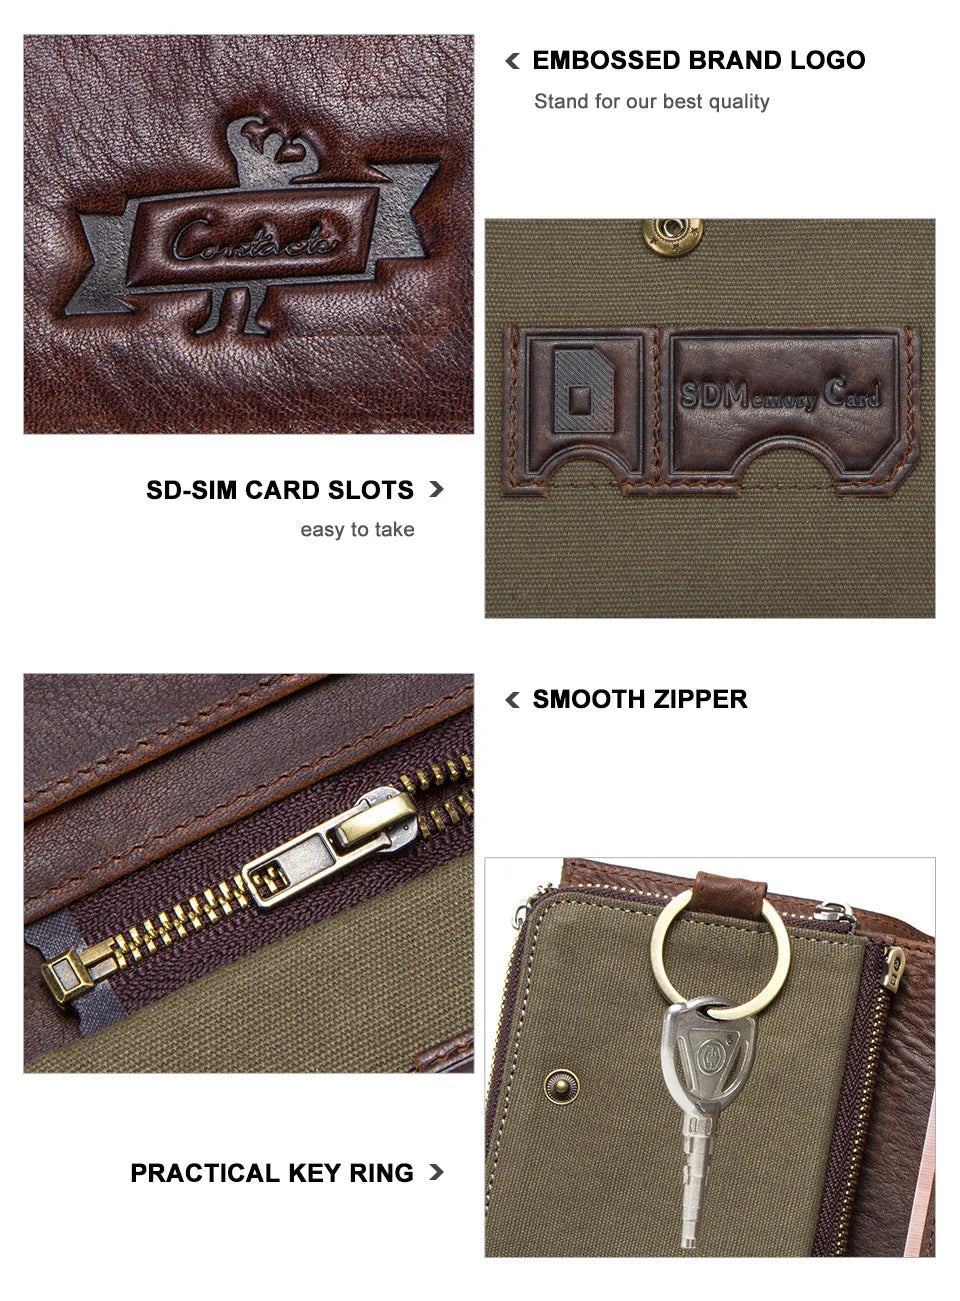 CONTACT'S 100% Genuine Leather RFID Men's Zipper Card Holder Wallet